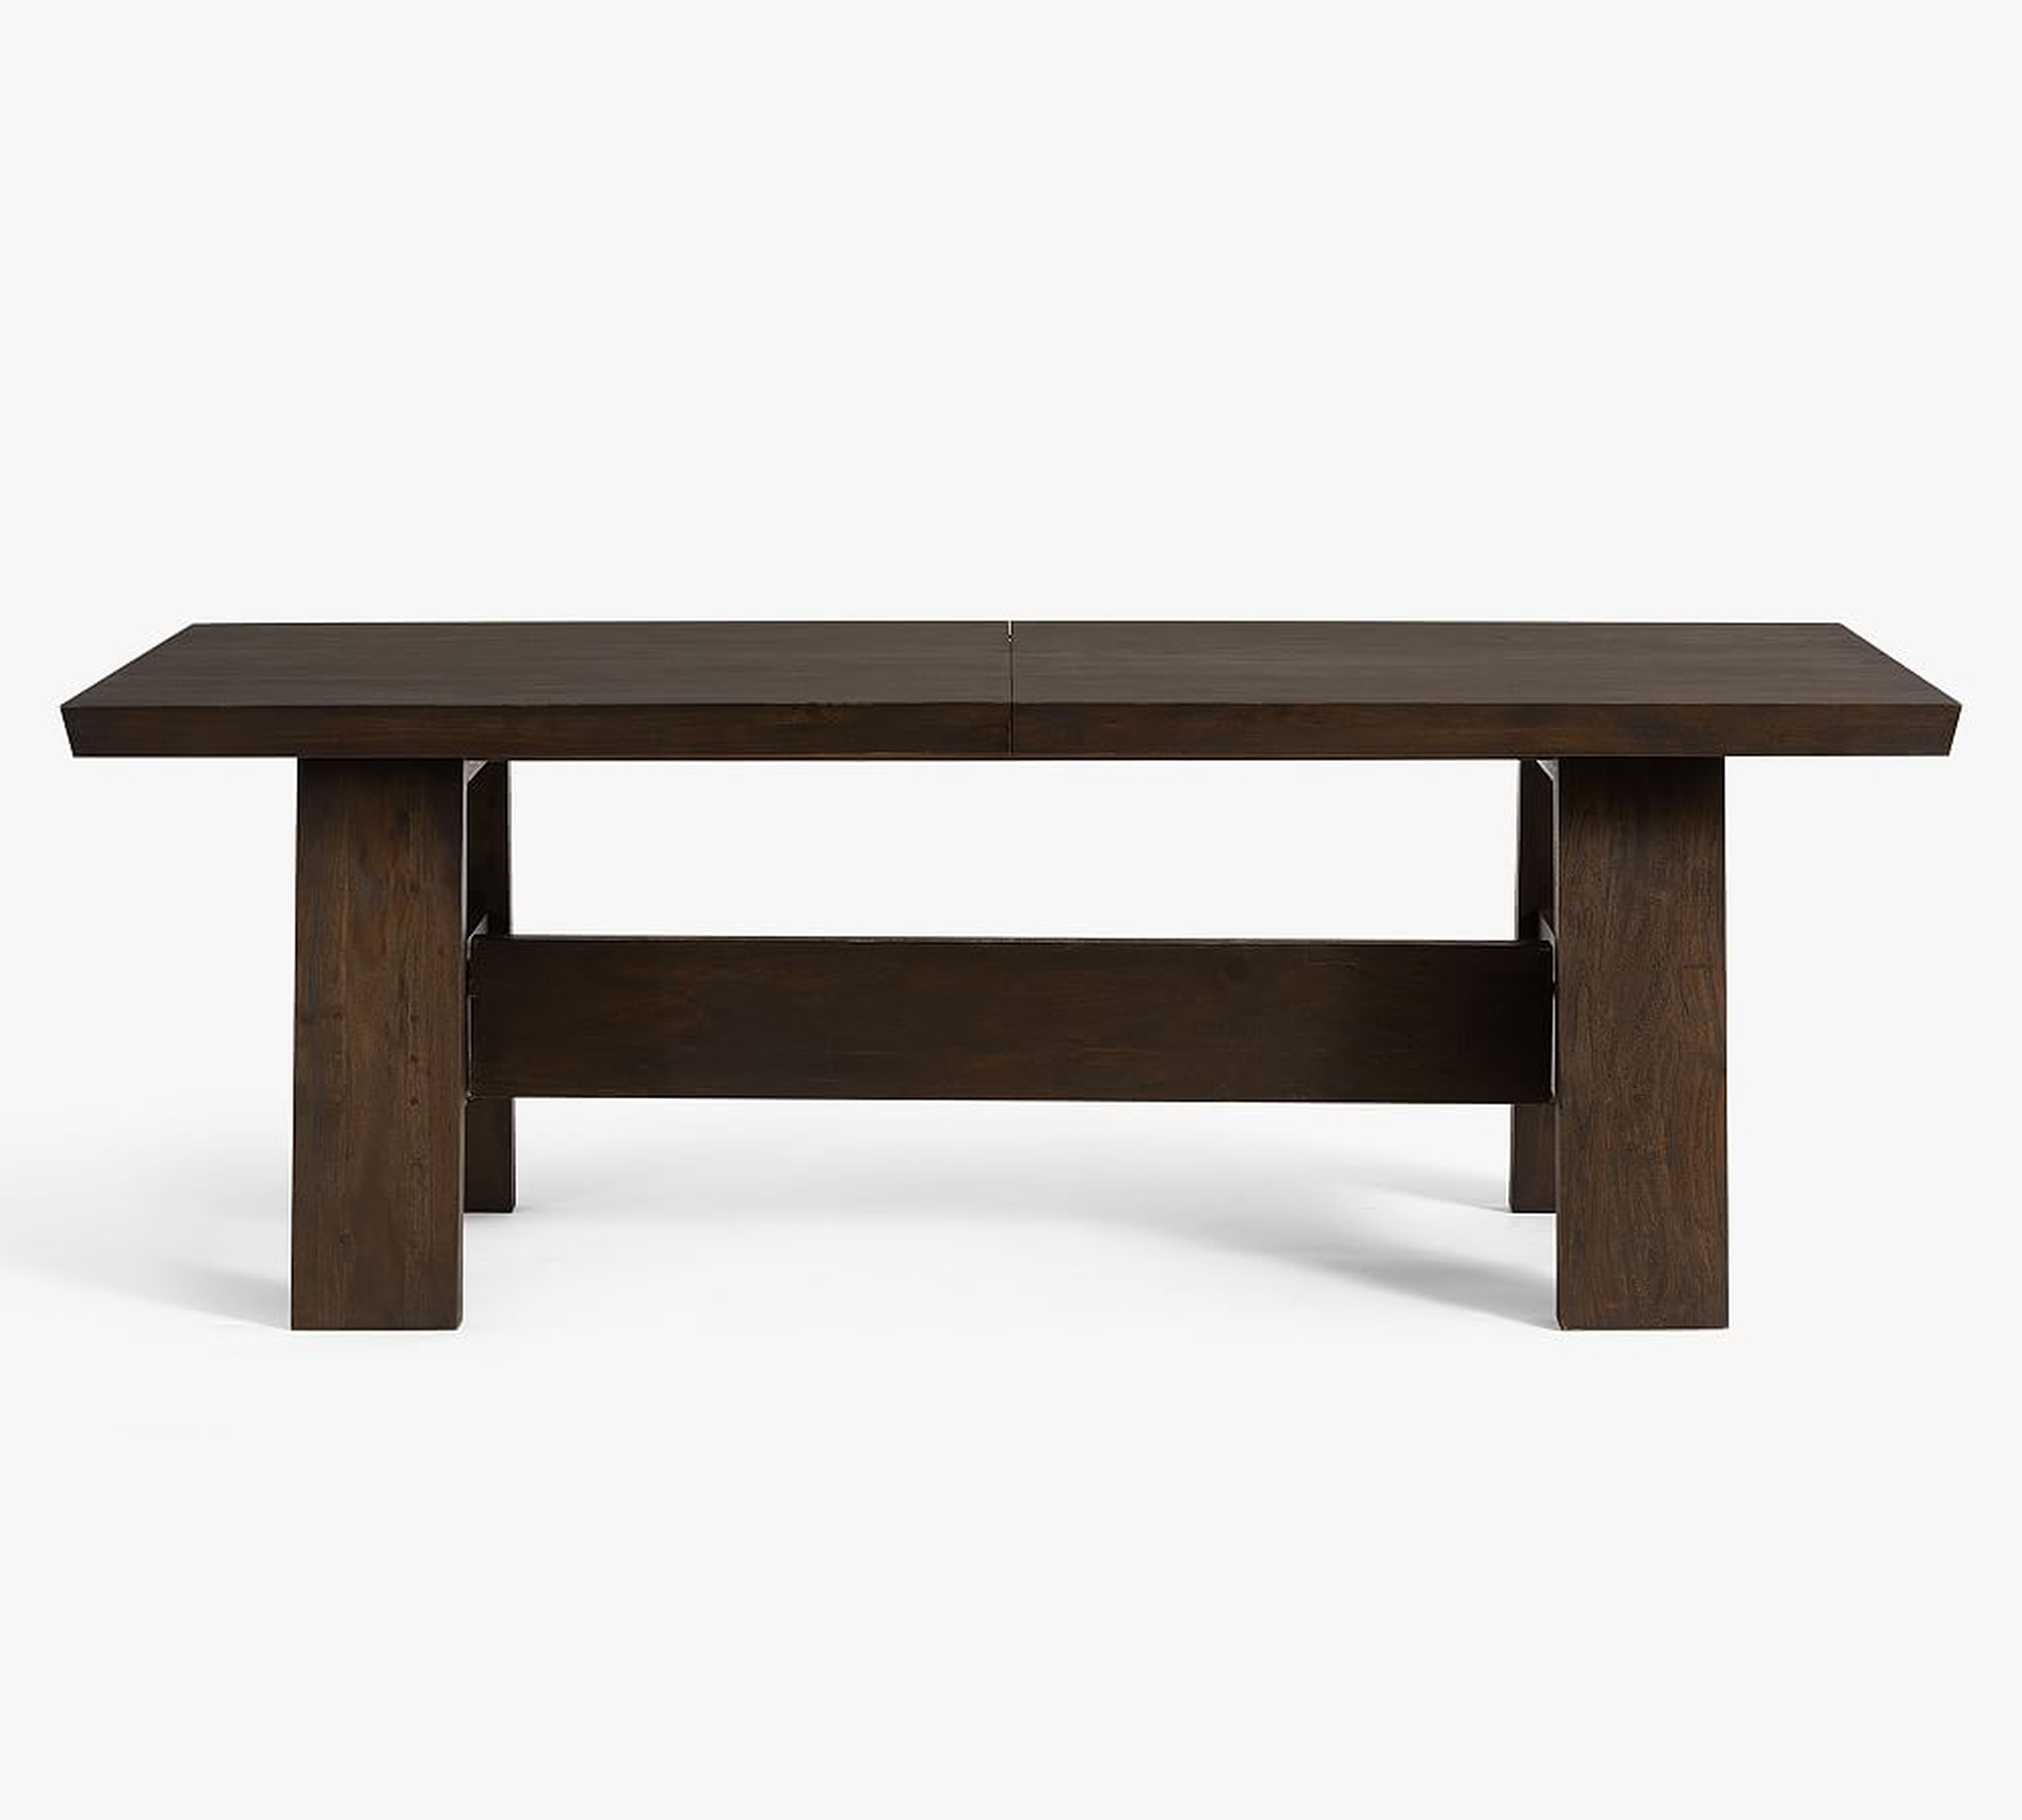 Madera Wood Extending Dining Table, Coffee Bean, 88"-108"L - Pottery Barn